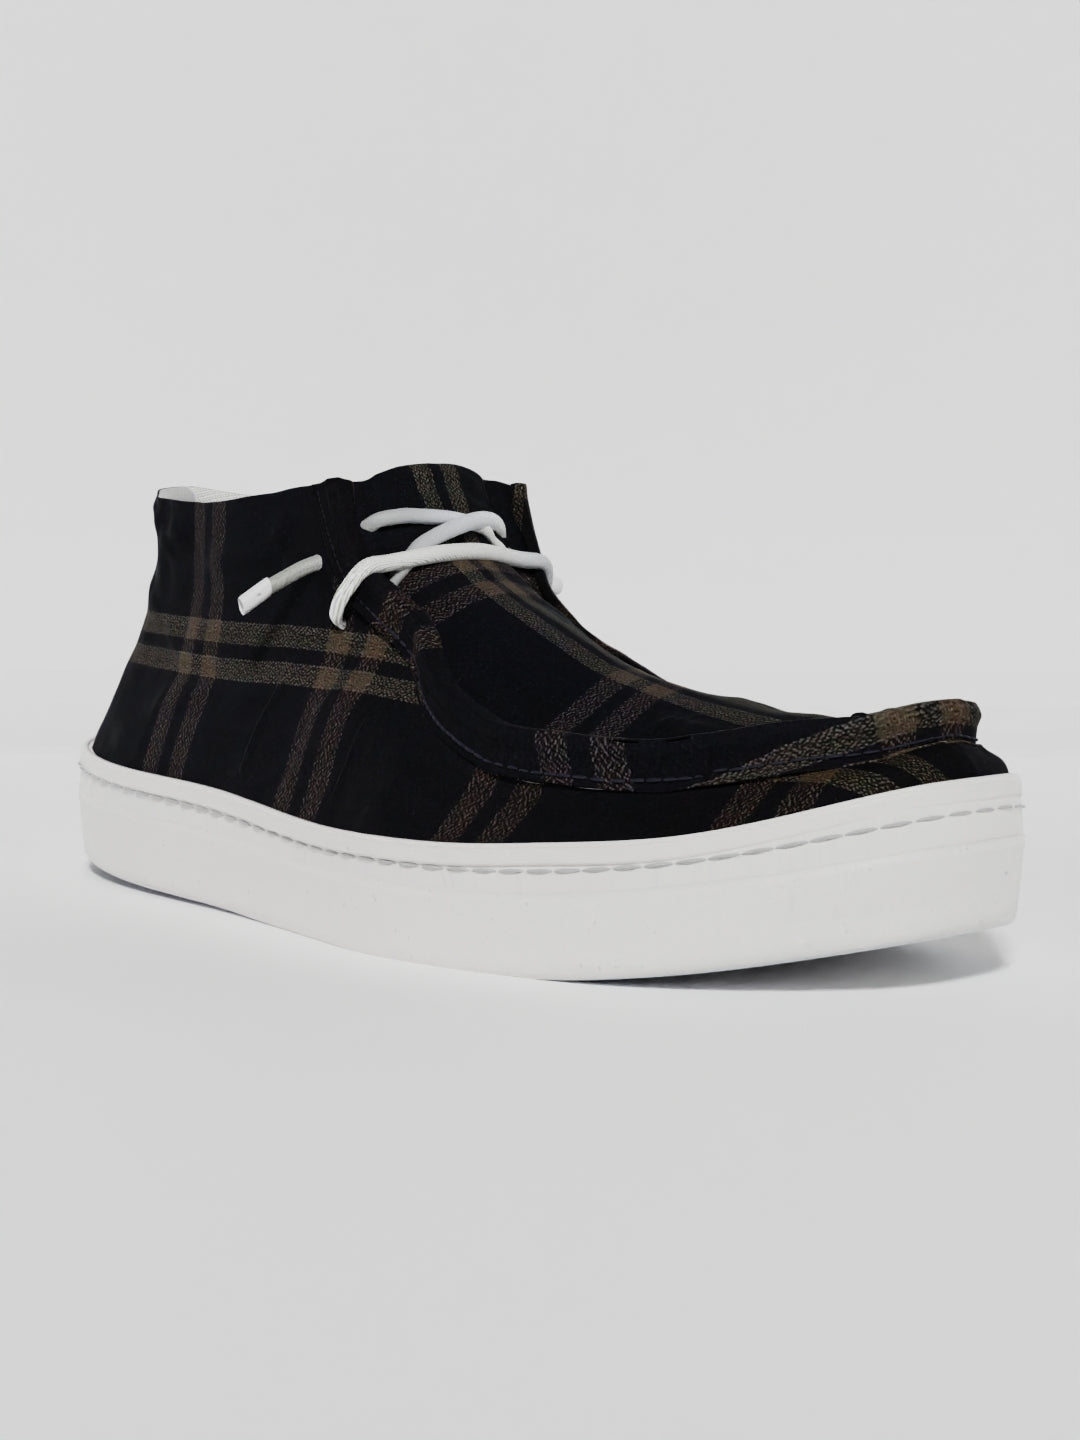 The Luna High Top Black and Beige Check